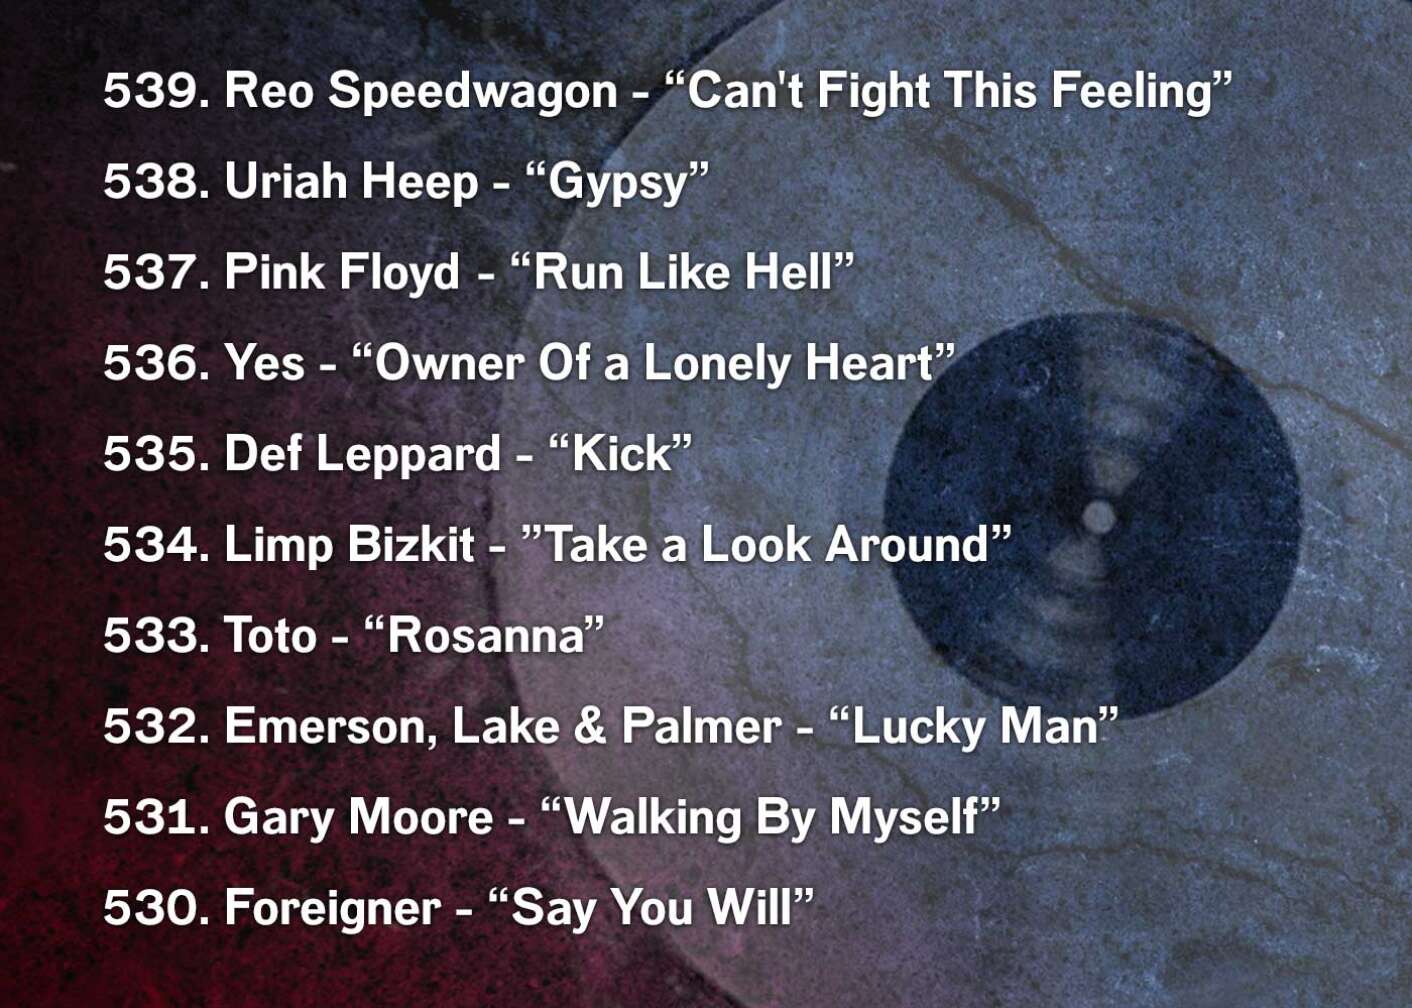 539. Reo Speedwagon - “Can't Fight This Feeling” 538. Uriah Heep - “Gypsy” 537. Pink Floyd	 - “Run Like Hell” 536. Yes - “Owner Of a Lonely Heart” 535. Def Leppard - “Kick” 534. Limp Bizkit - ”Take a Look Around” 533. Toto - “Rosanna” 532. Emerson, Lake & Palmer - “Lucky Man” 531. Gary Moore - “Walking By Myself” 530. Foreigner - “Say You Will”